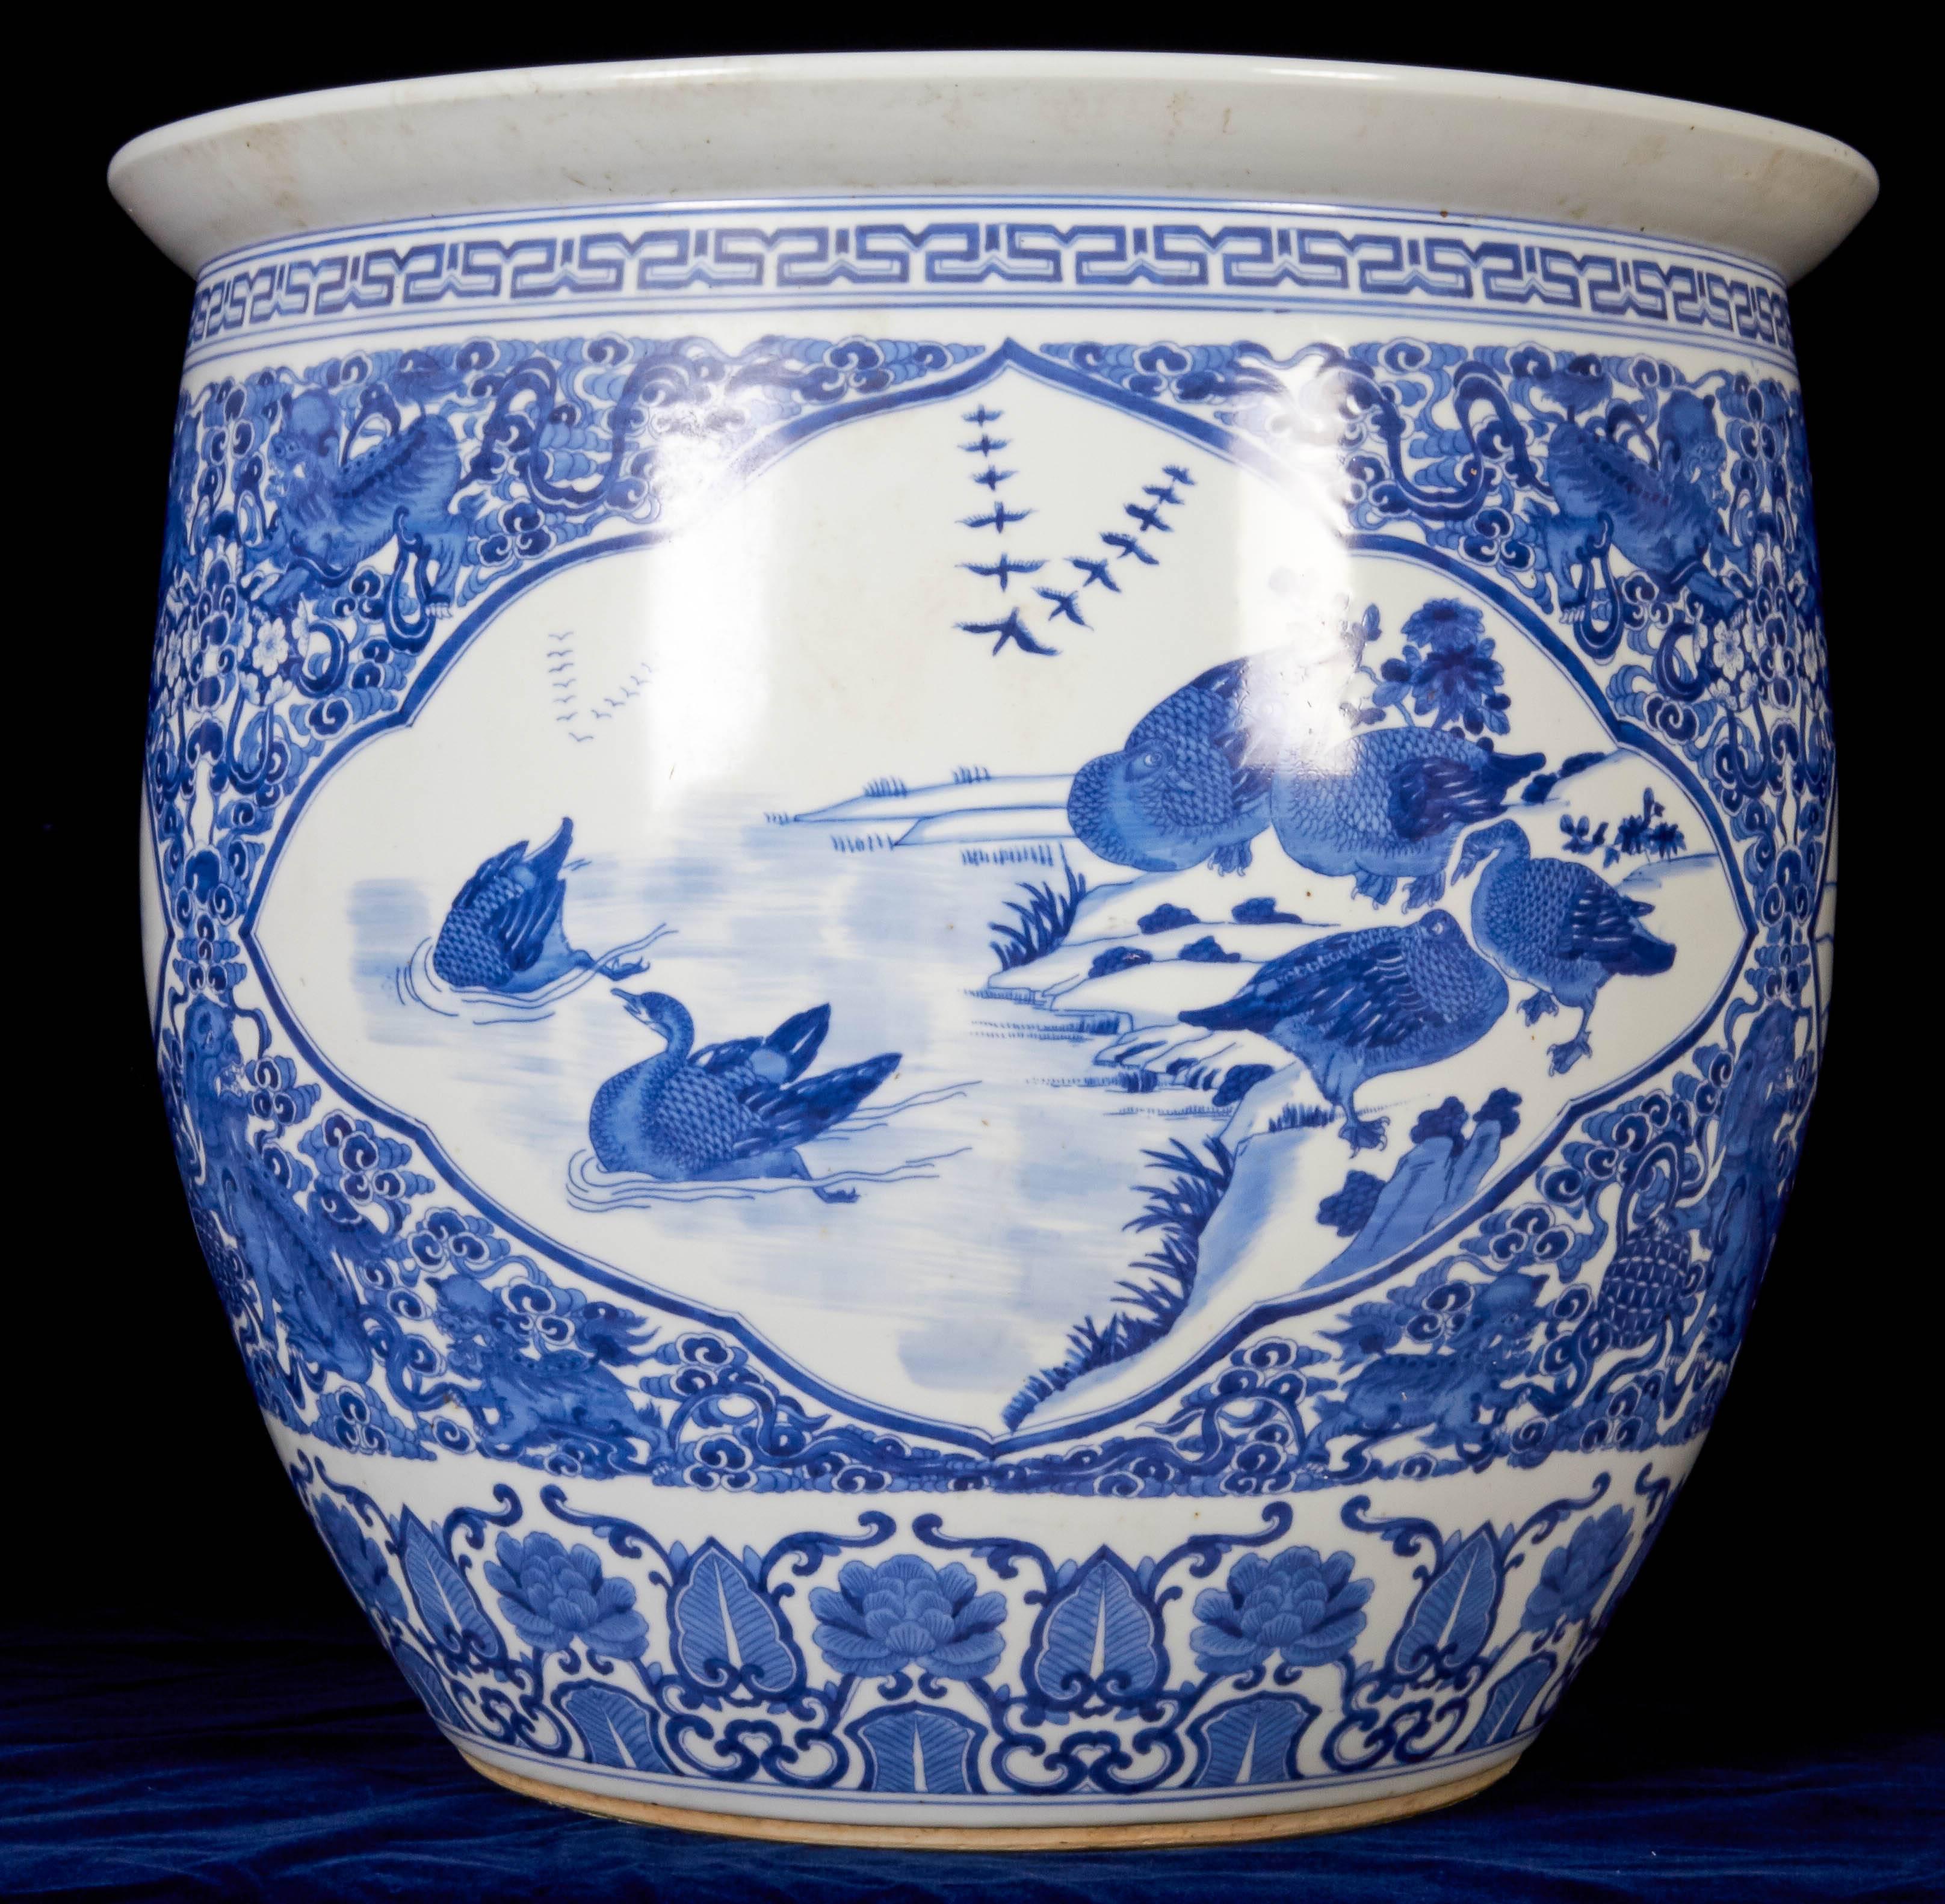 A large and quite fine pair of antique Chinese blue and white porcelain planters / fishbowls / jardinières. Each finely decorated with ducks, birds and flowers with a band of wreaths on the base below the rim.